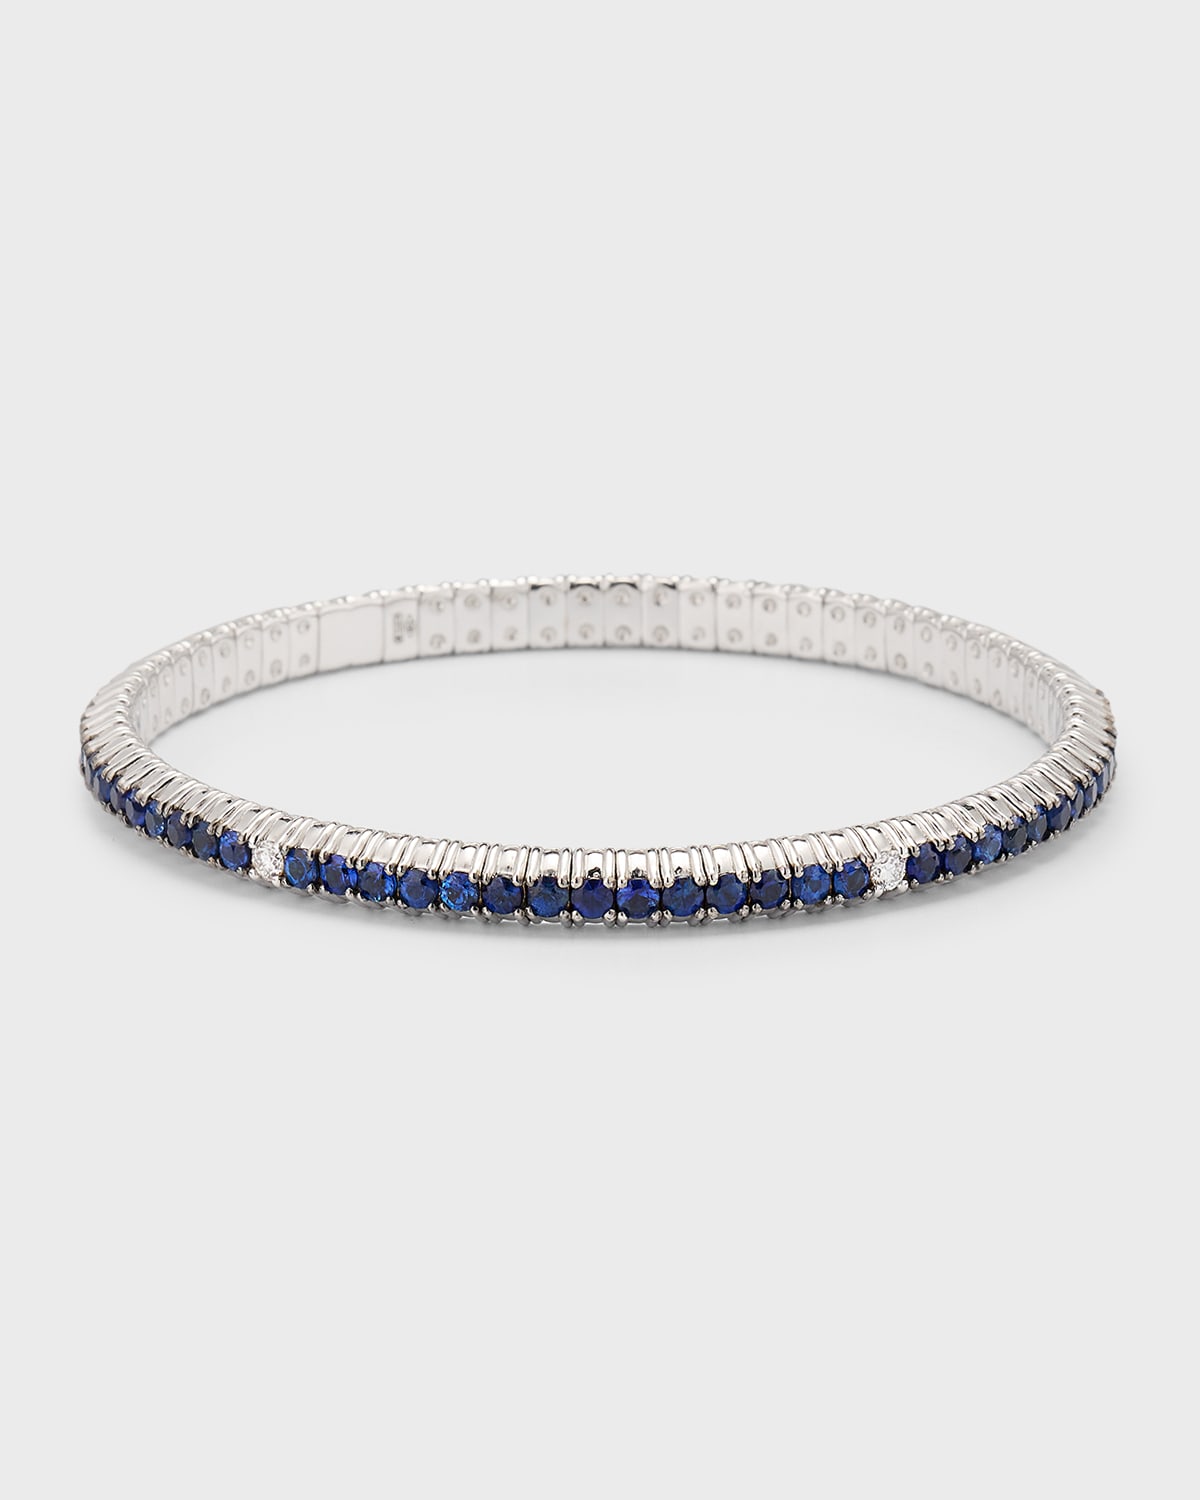 Zydo 18k White Gold Bracelet With Blue Sapphires And White Diamonds In Black